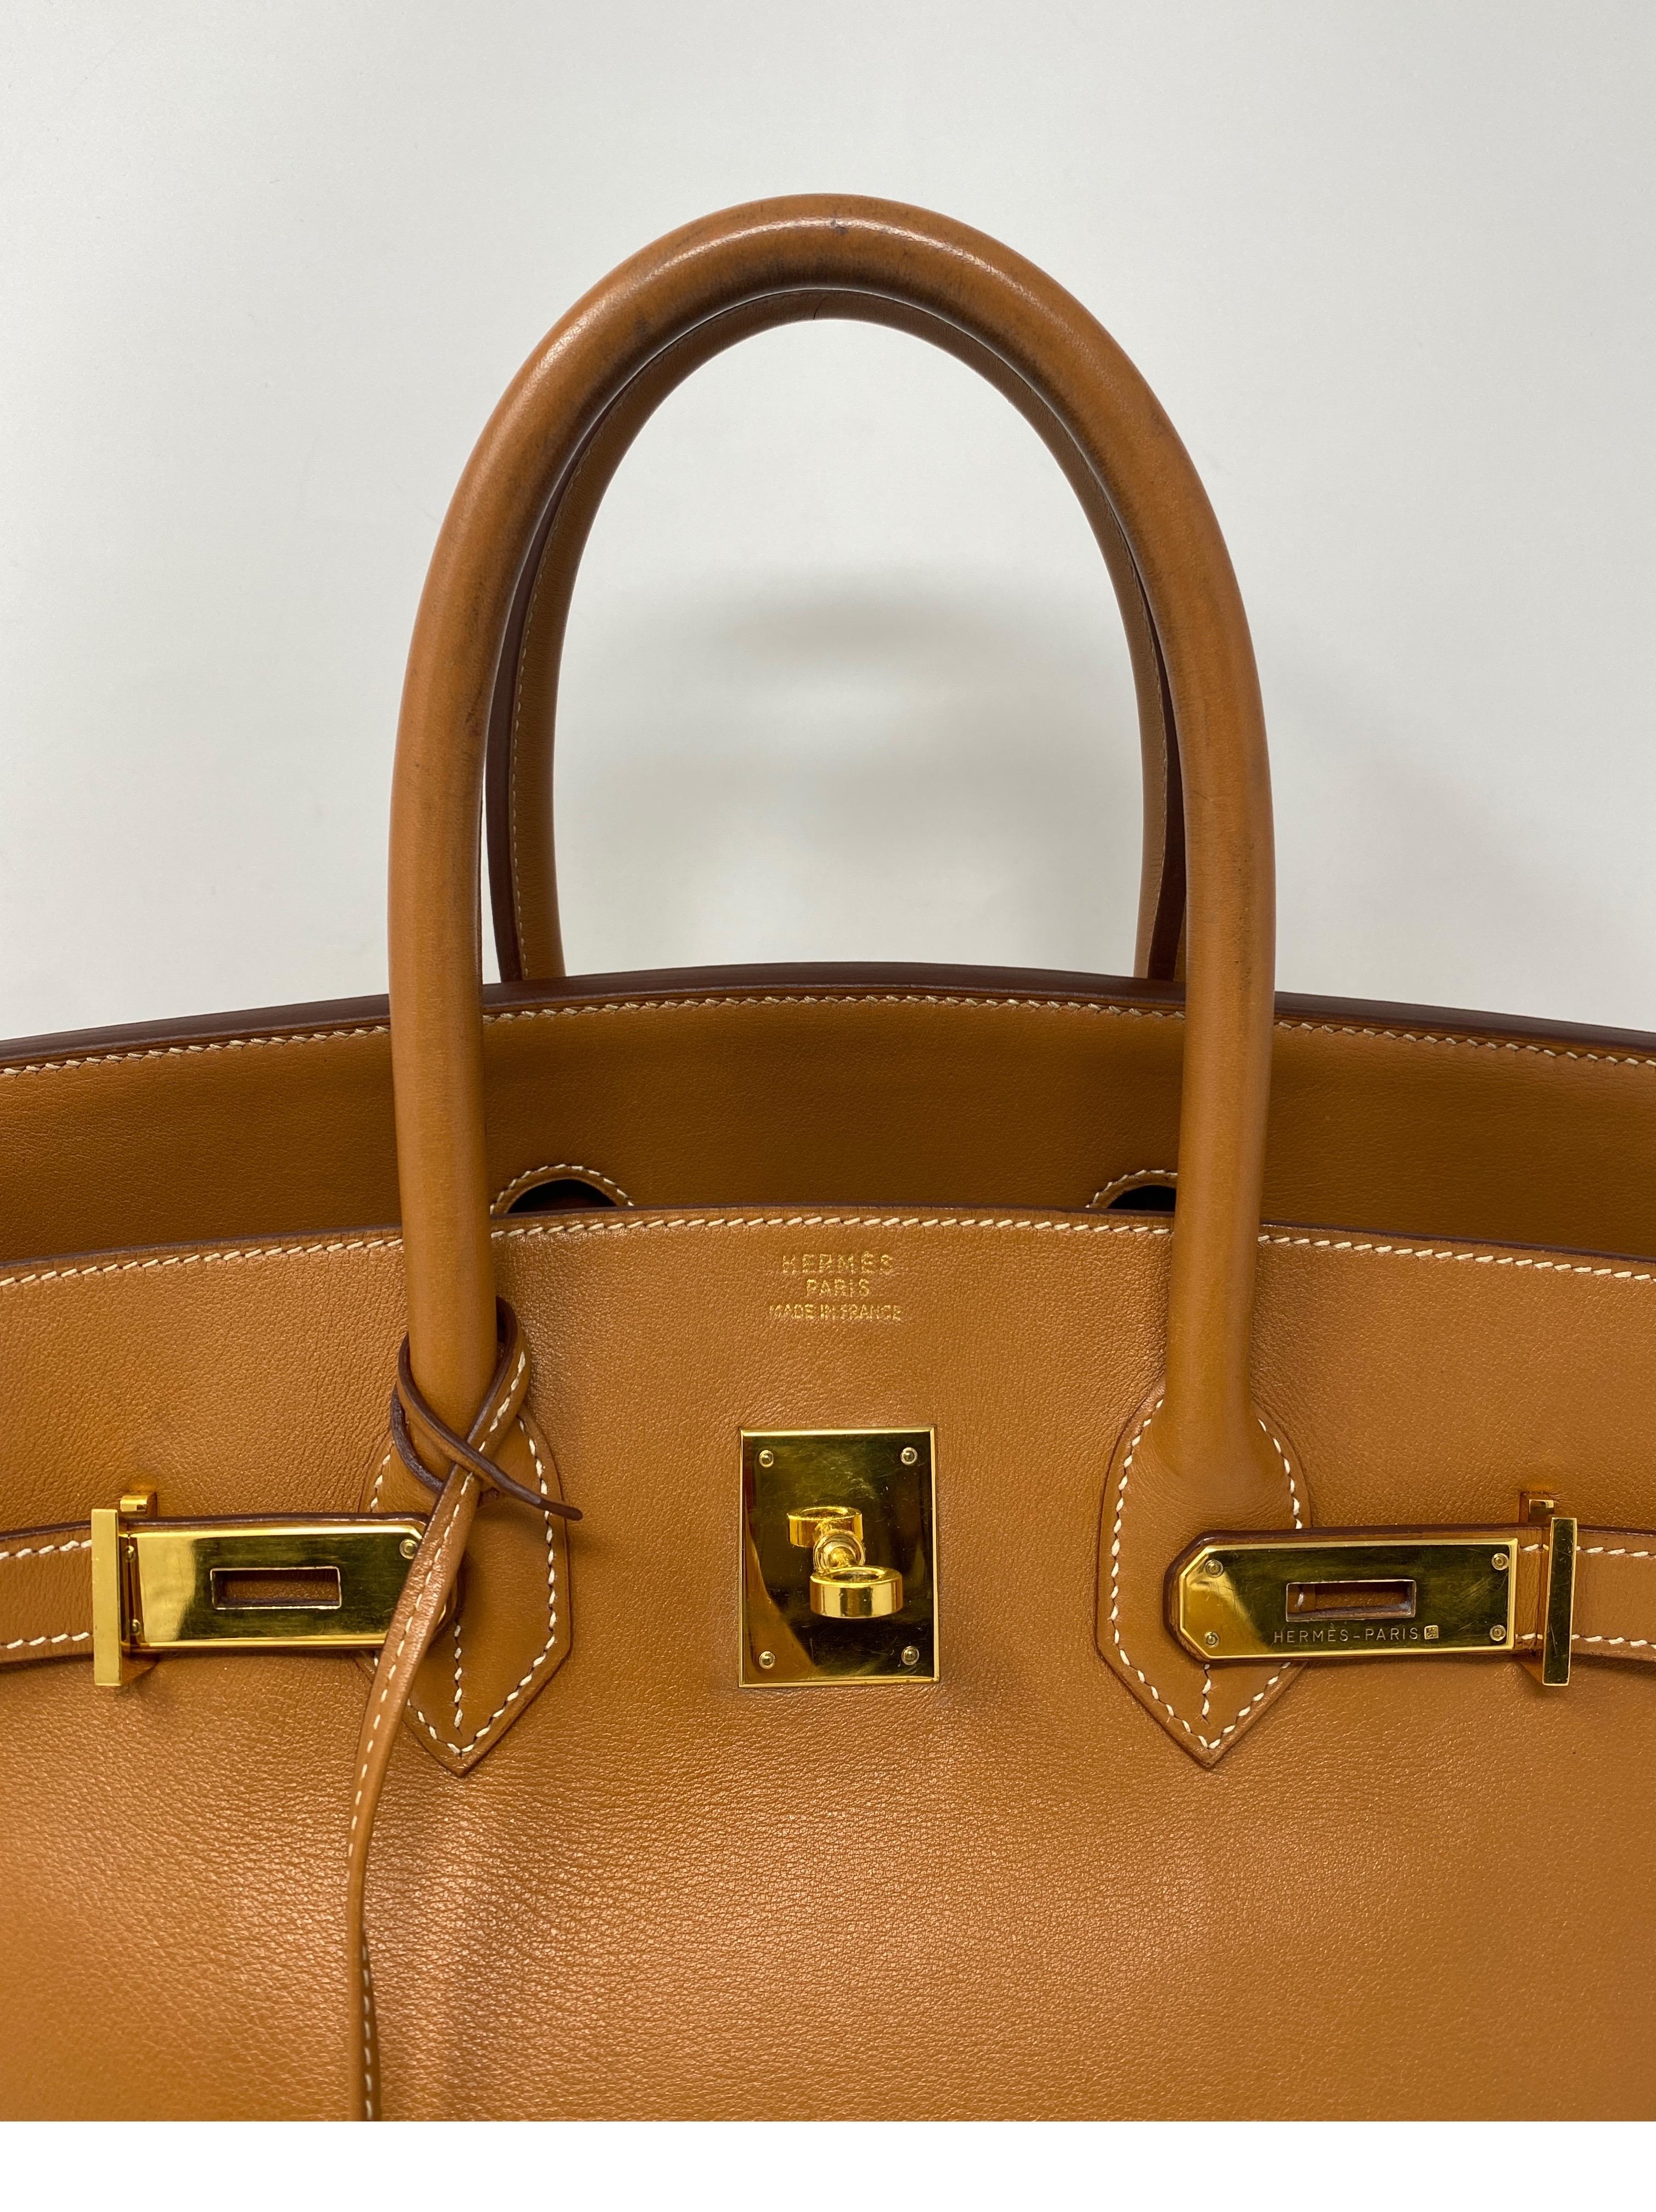 Hermes Birkin 35 Gold with Gold Hardware. The most wanted combination. Gold on gold. Vintage in good condition. Has slight crease in front. Light wear on handles. Swift leather. Beautiful bag. Classic for your collection. Includes clochette, keys